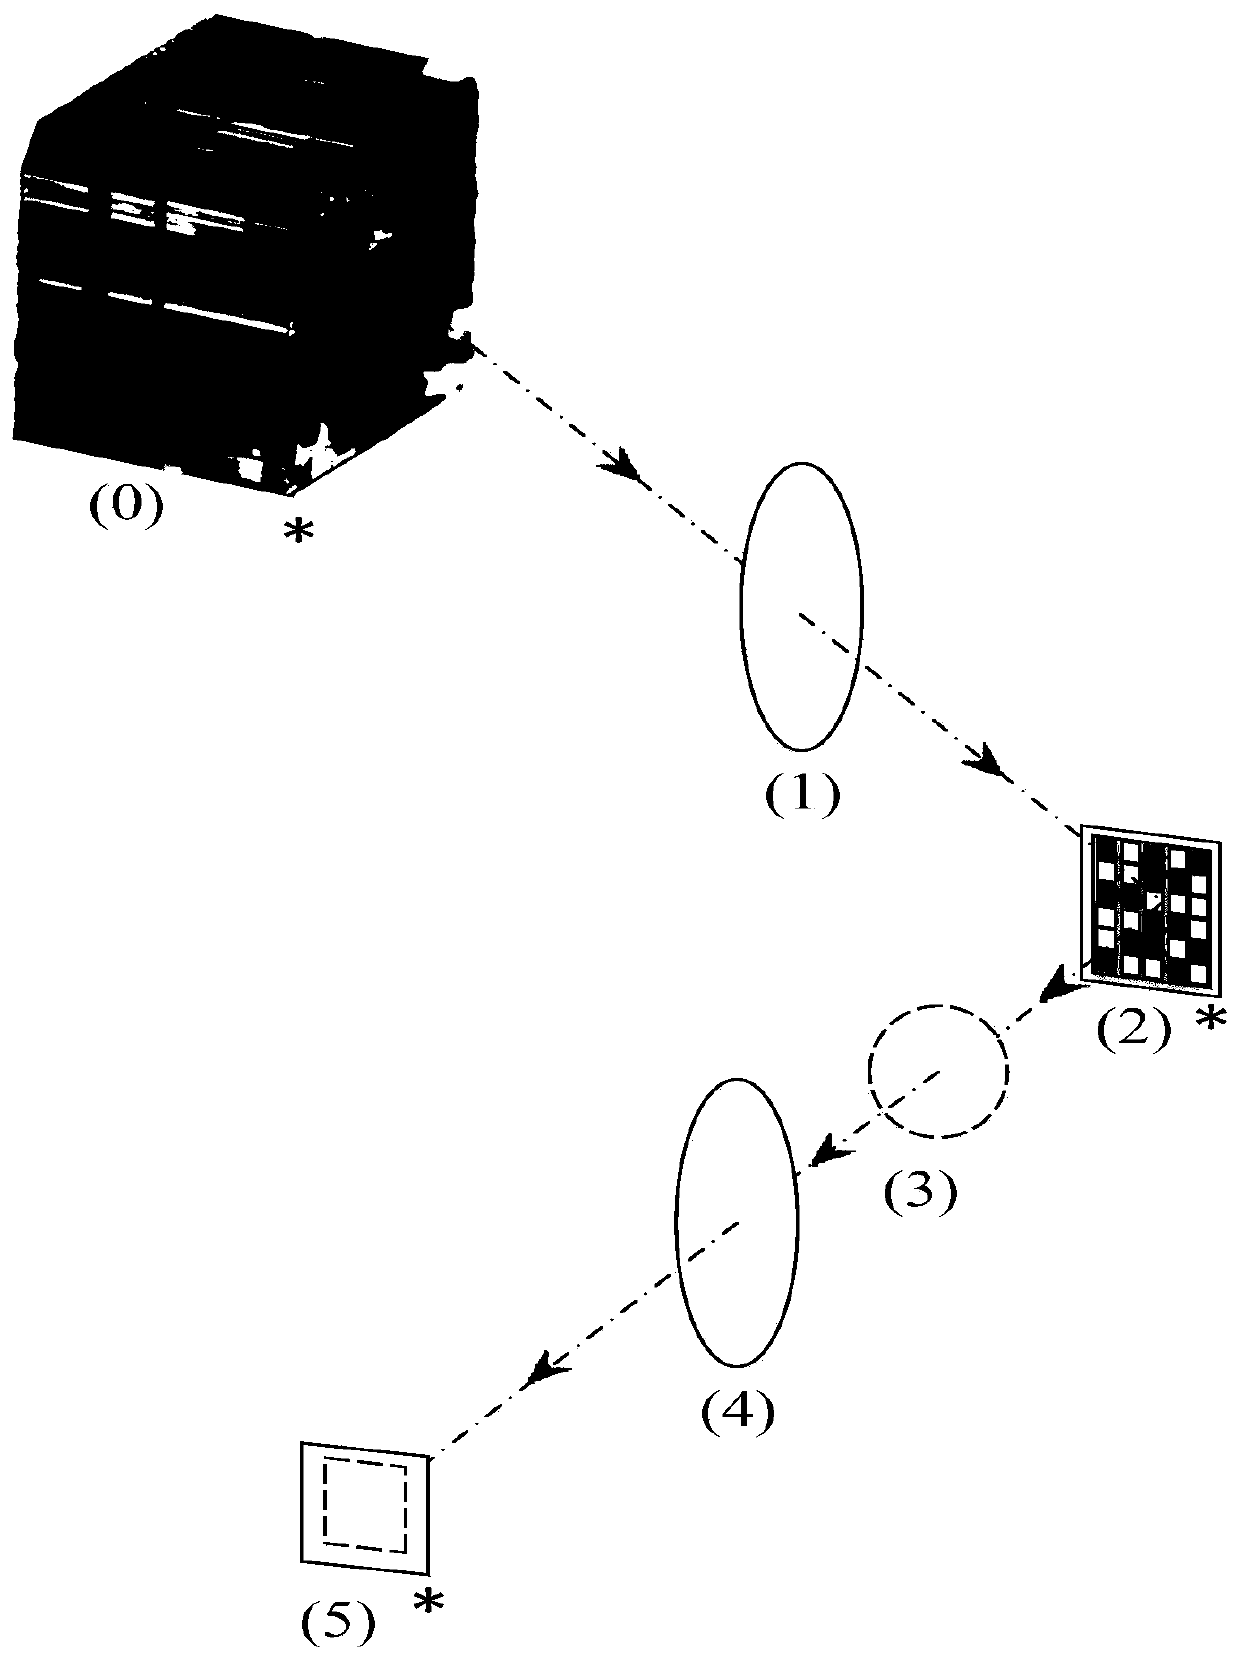 A hyperspectral image acquisition imaging system and control method based on compressed sensing